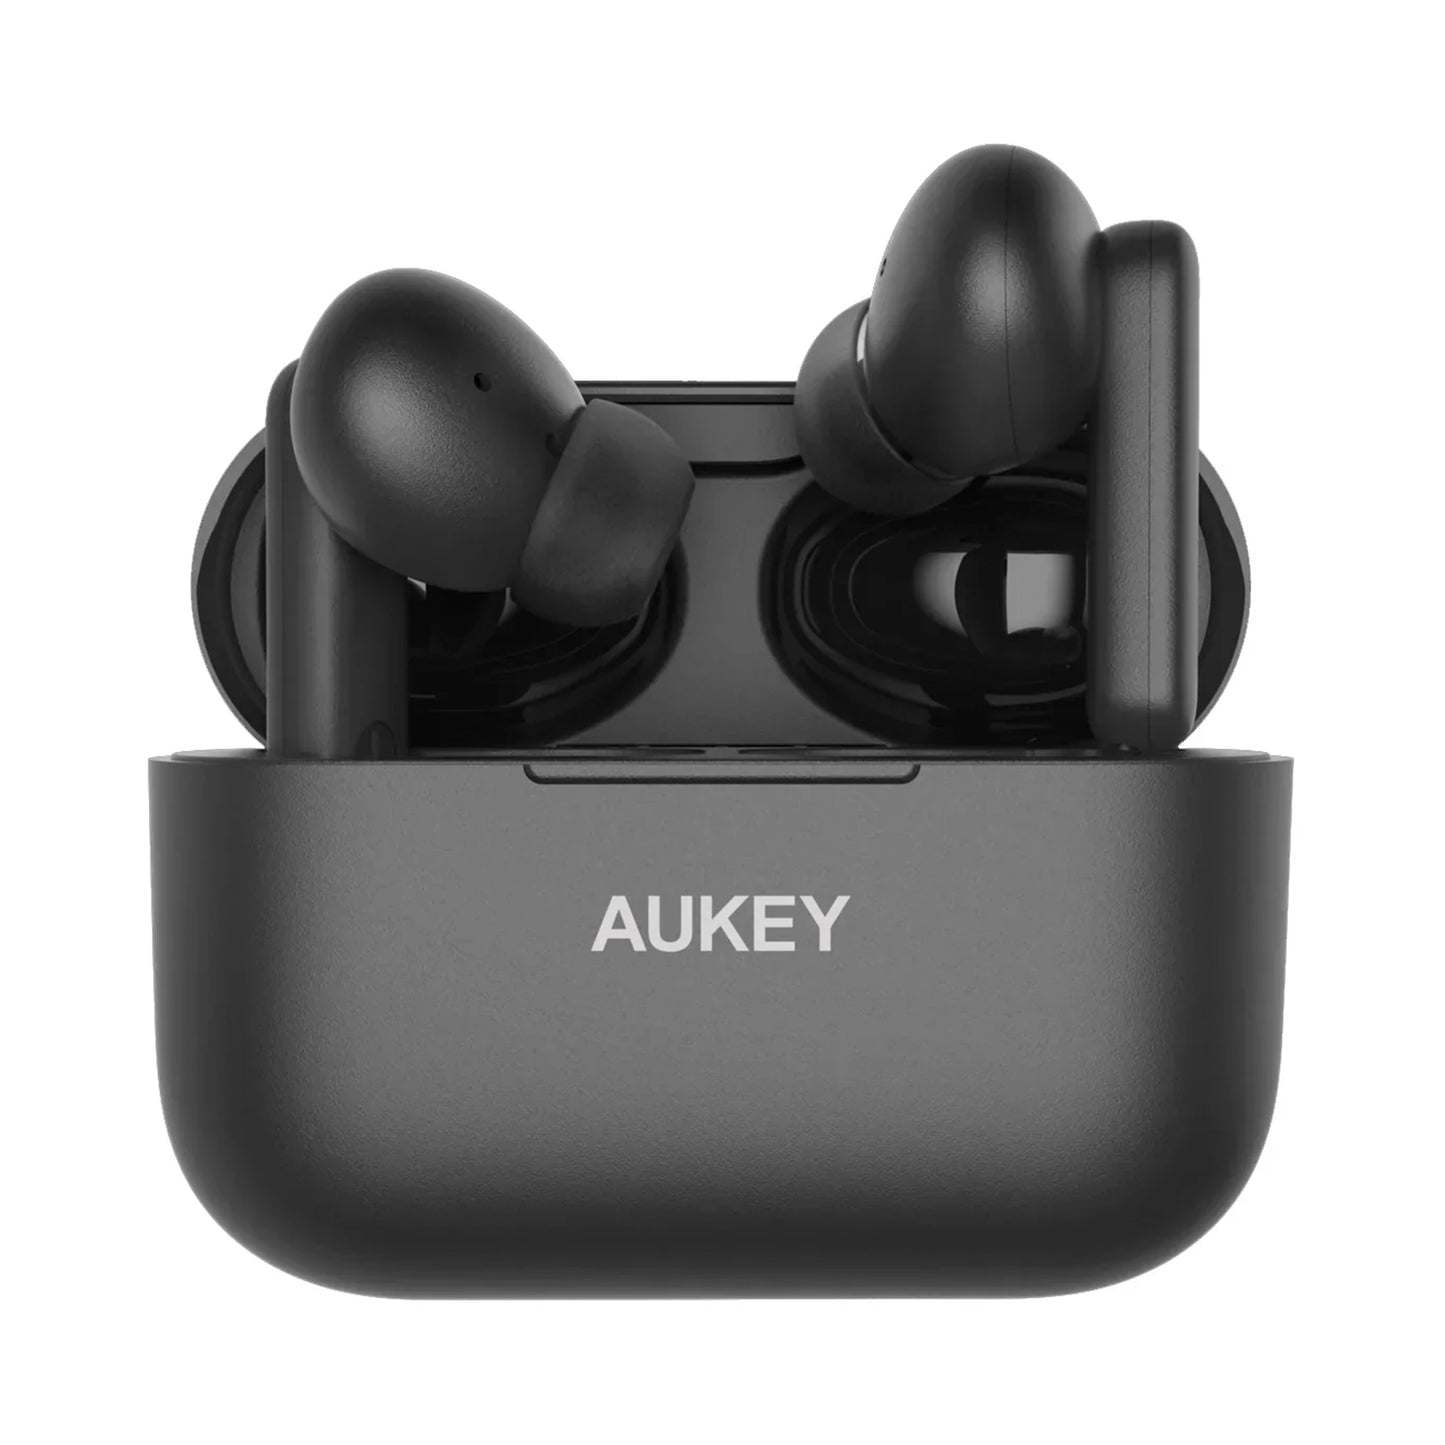 AUKEY EP-M1NC True Wireless Earbuds with Active Noise Cancelling - Black